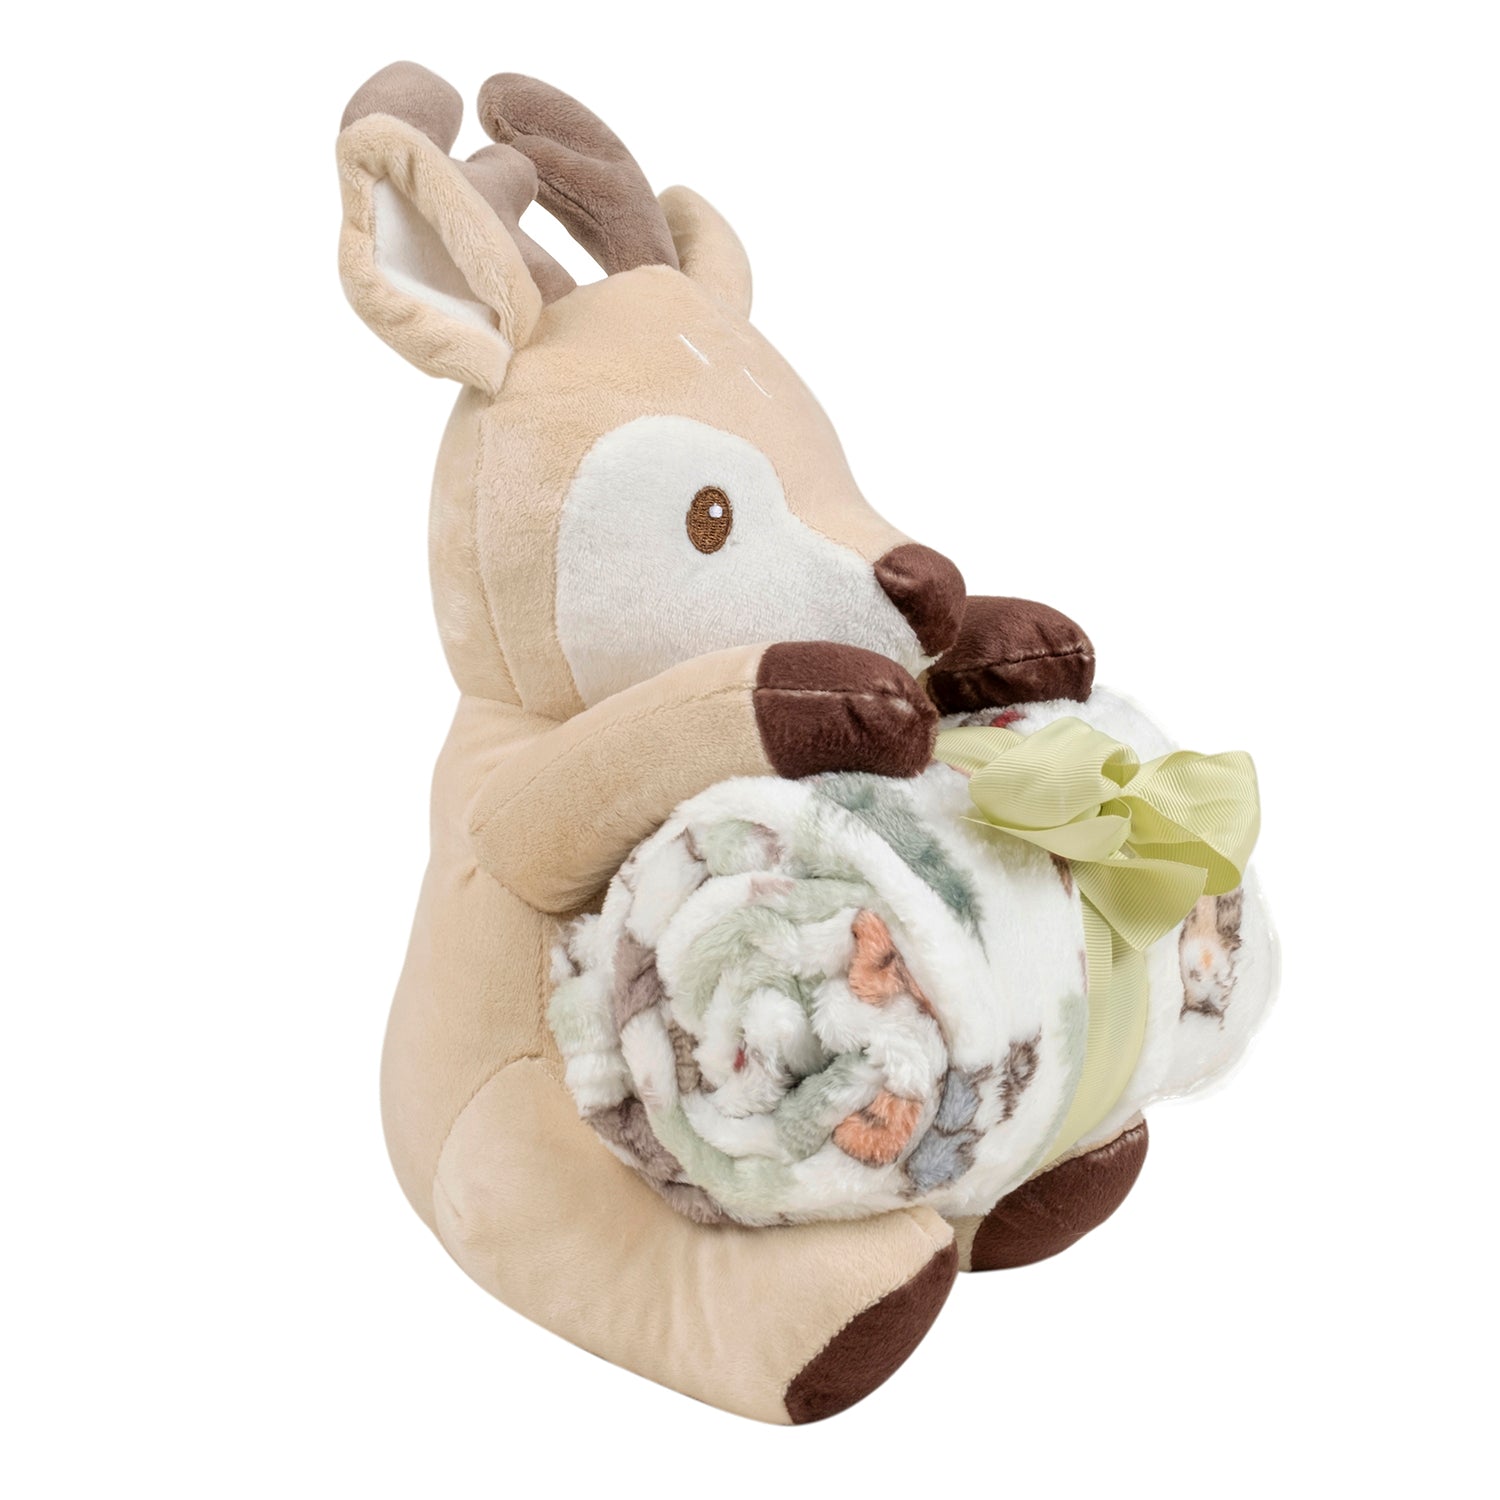 Baby Moo Reindeer Snuggle Buddy Soft Rattle and Plush Blanket Gift Toy Blanket - Beige